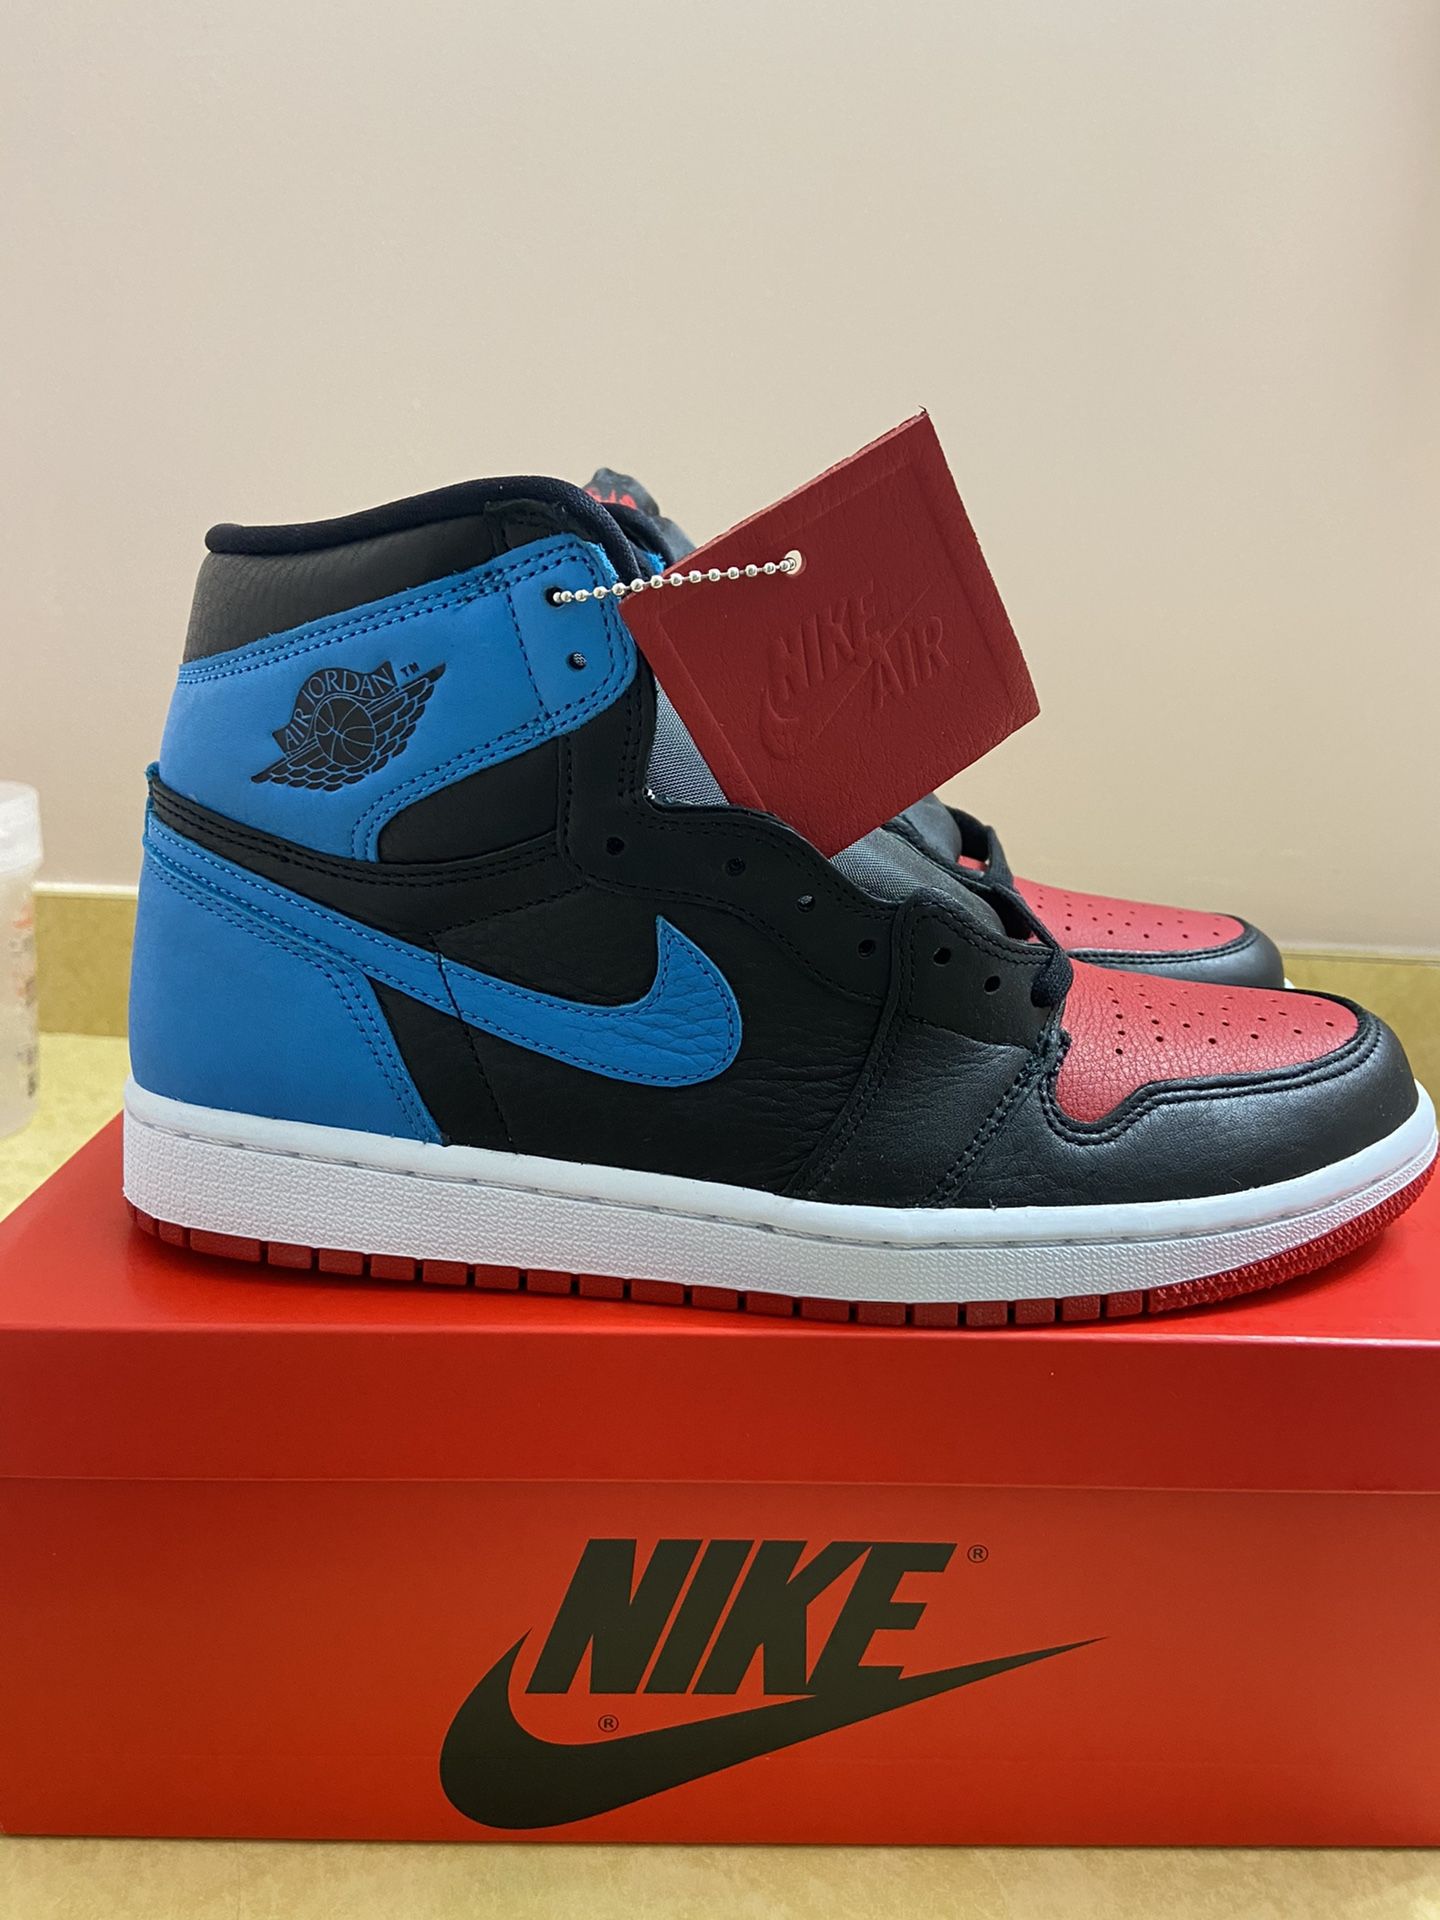 Air Jordan 1 UNC To Chicago Size 8.5W (7 Mens) NEW